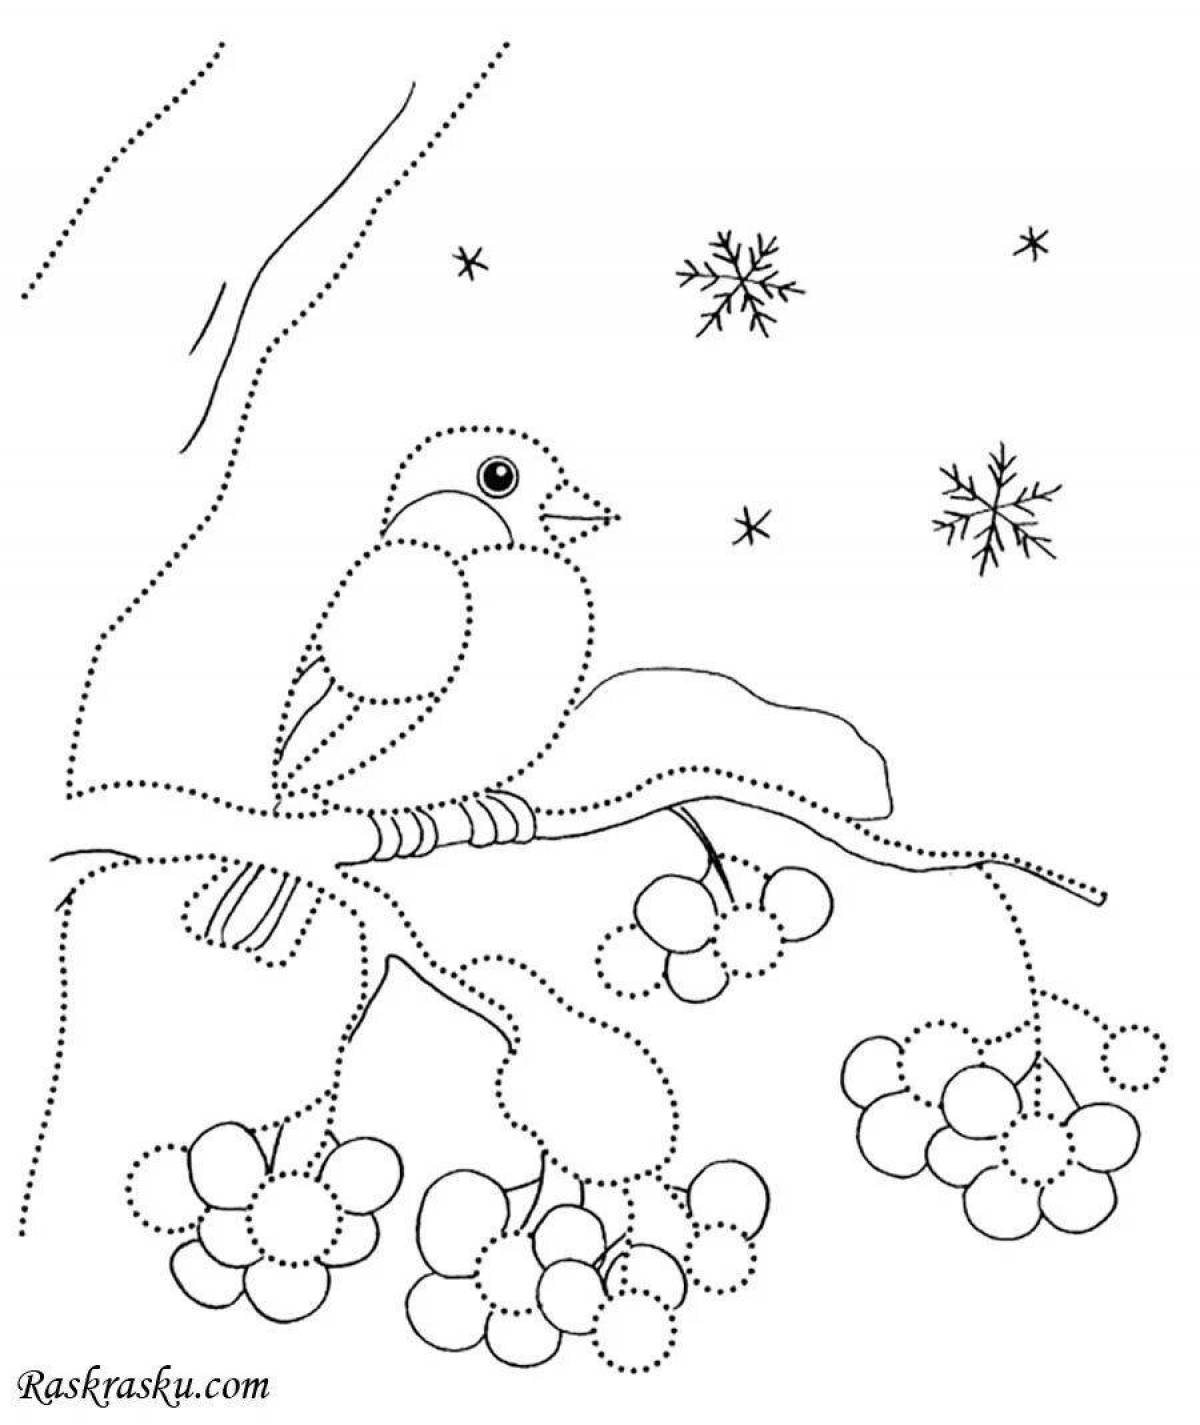 Sublime coloring page bullfinch bird photo winter